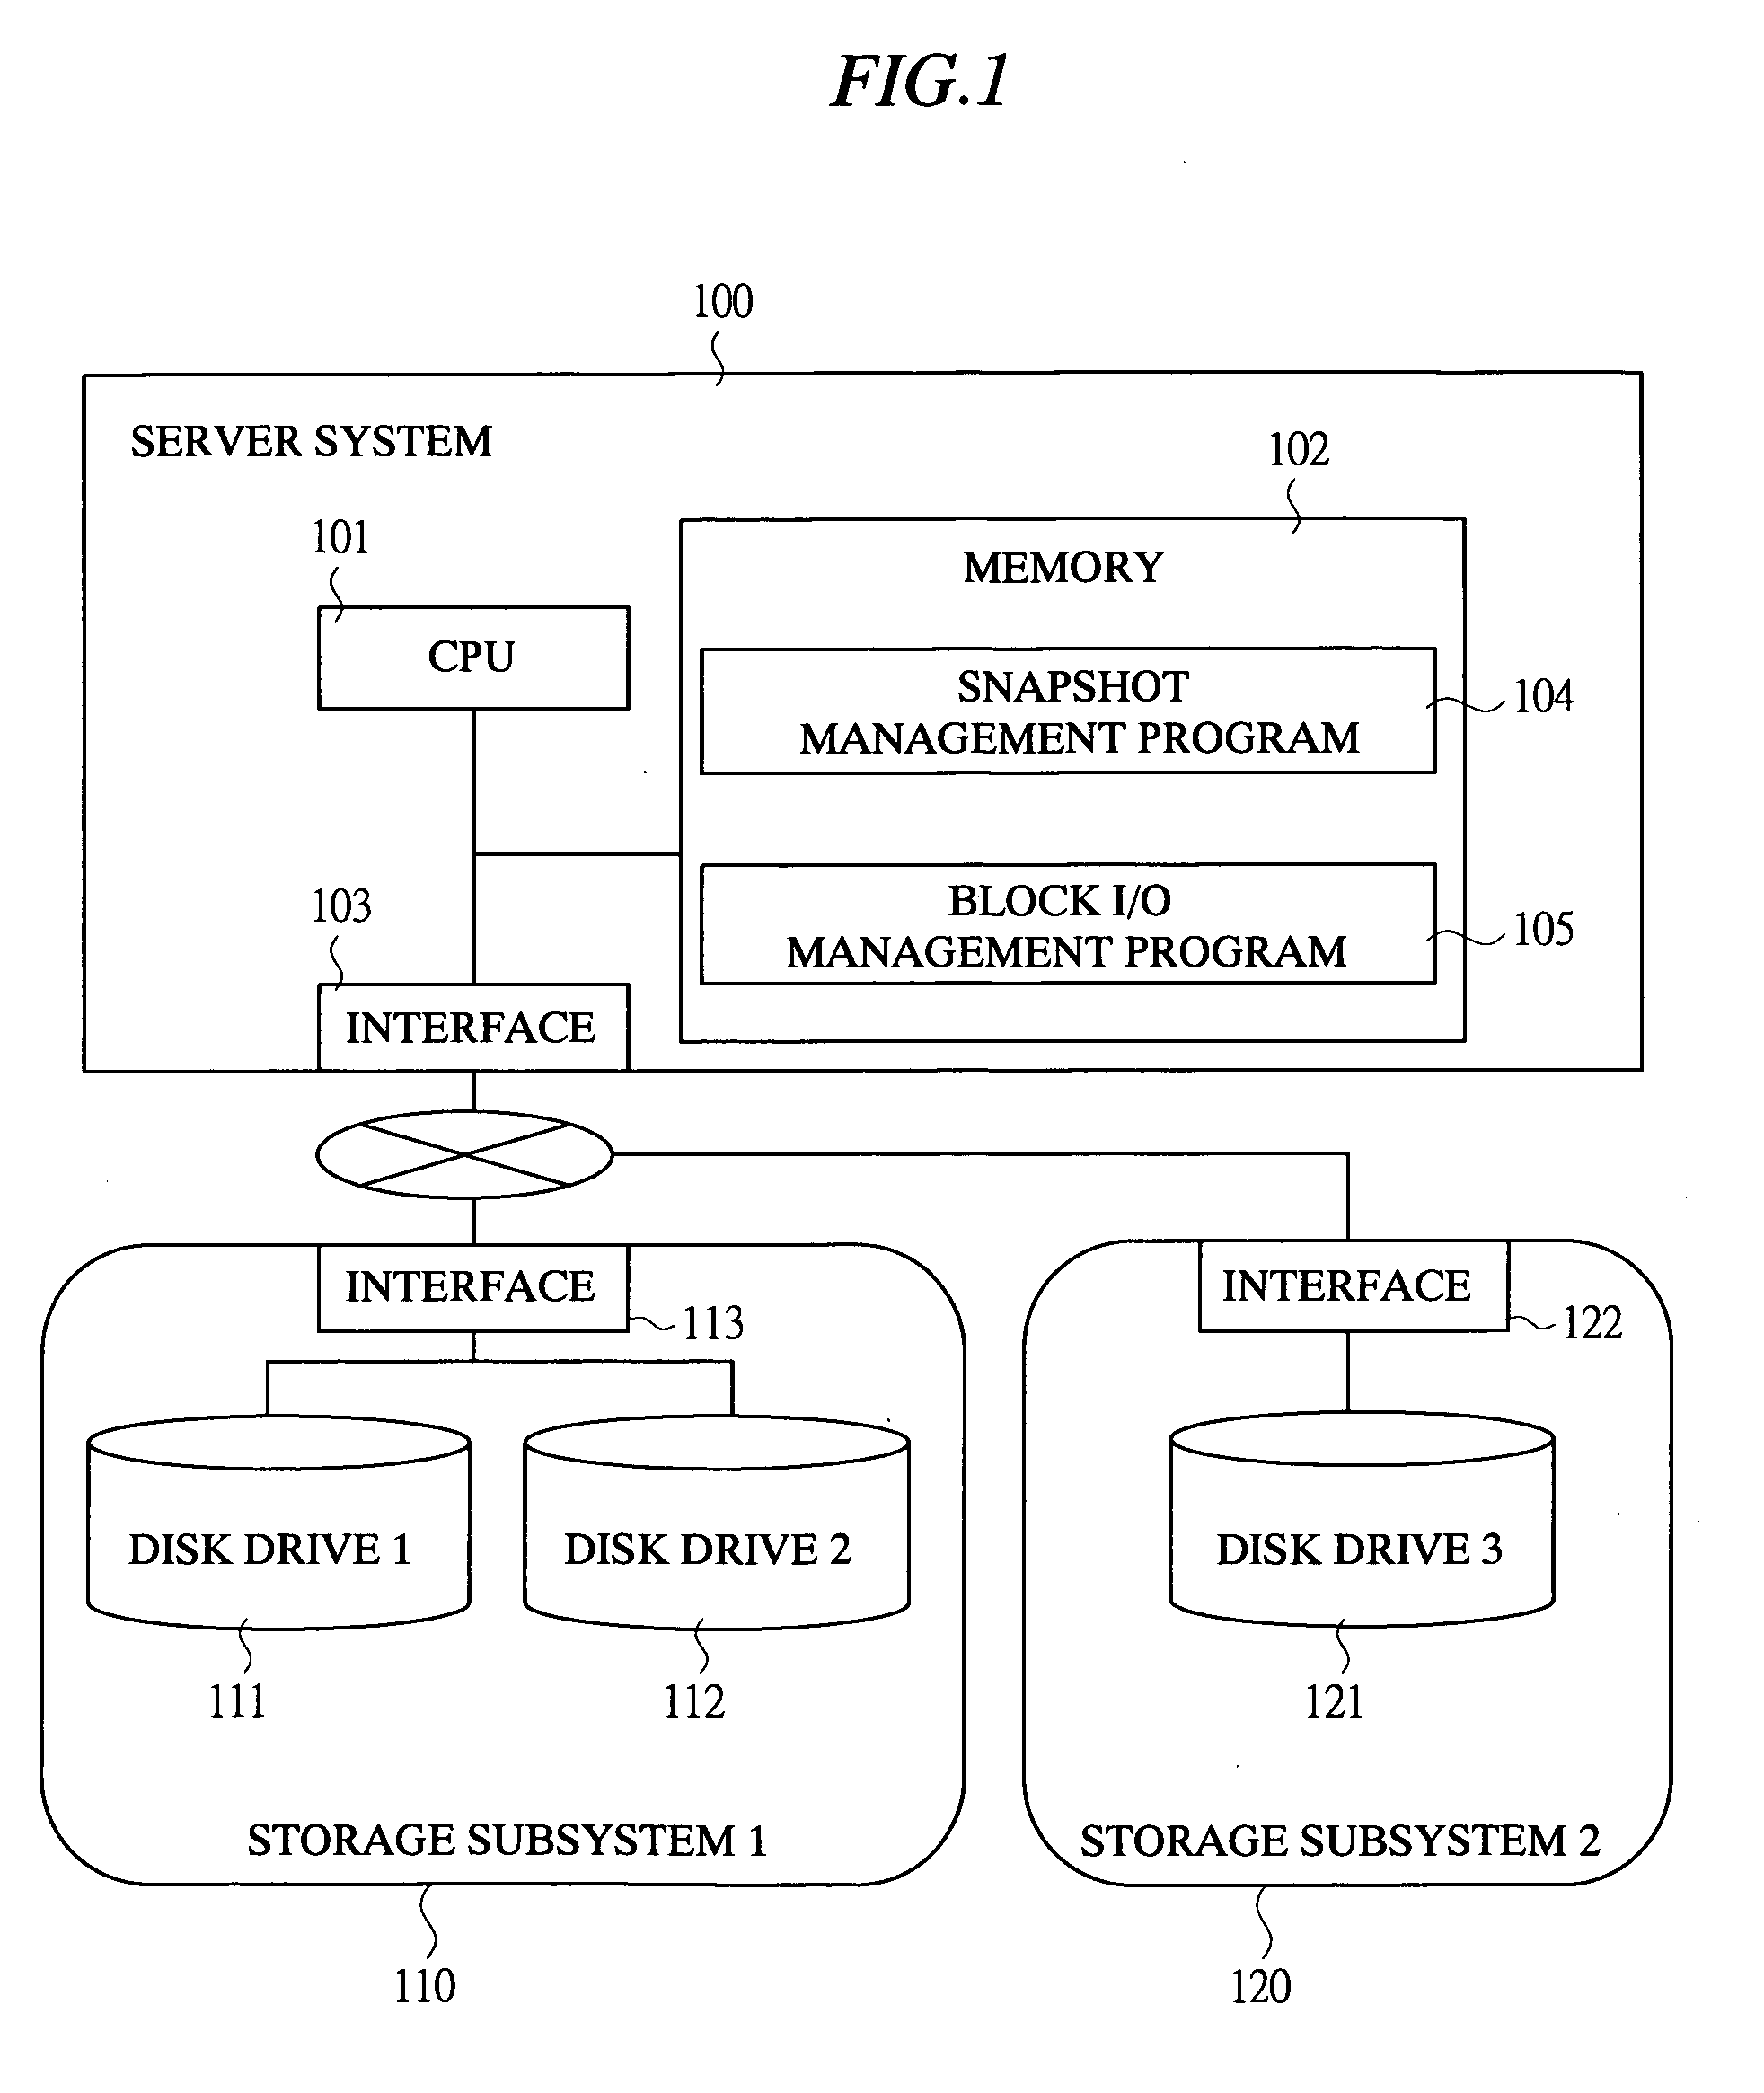 Method for creating and preserving snapshots in a storage system